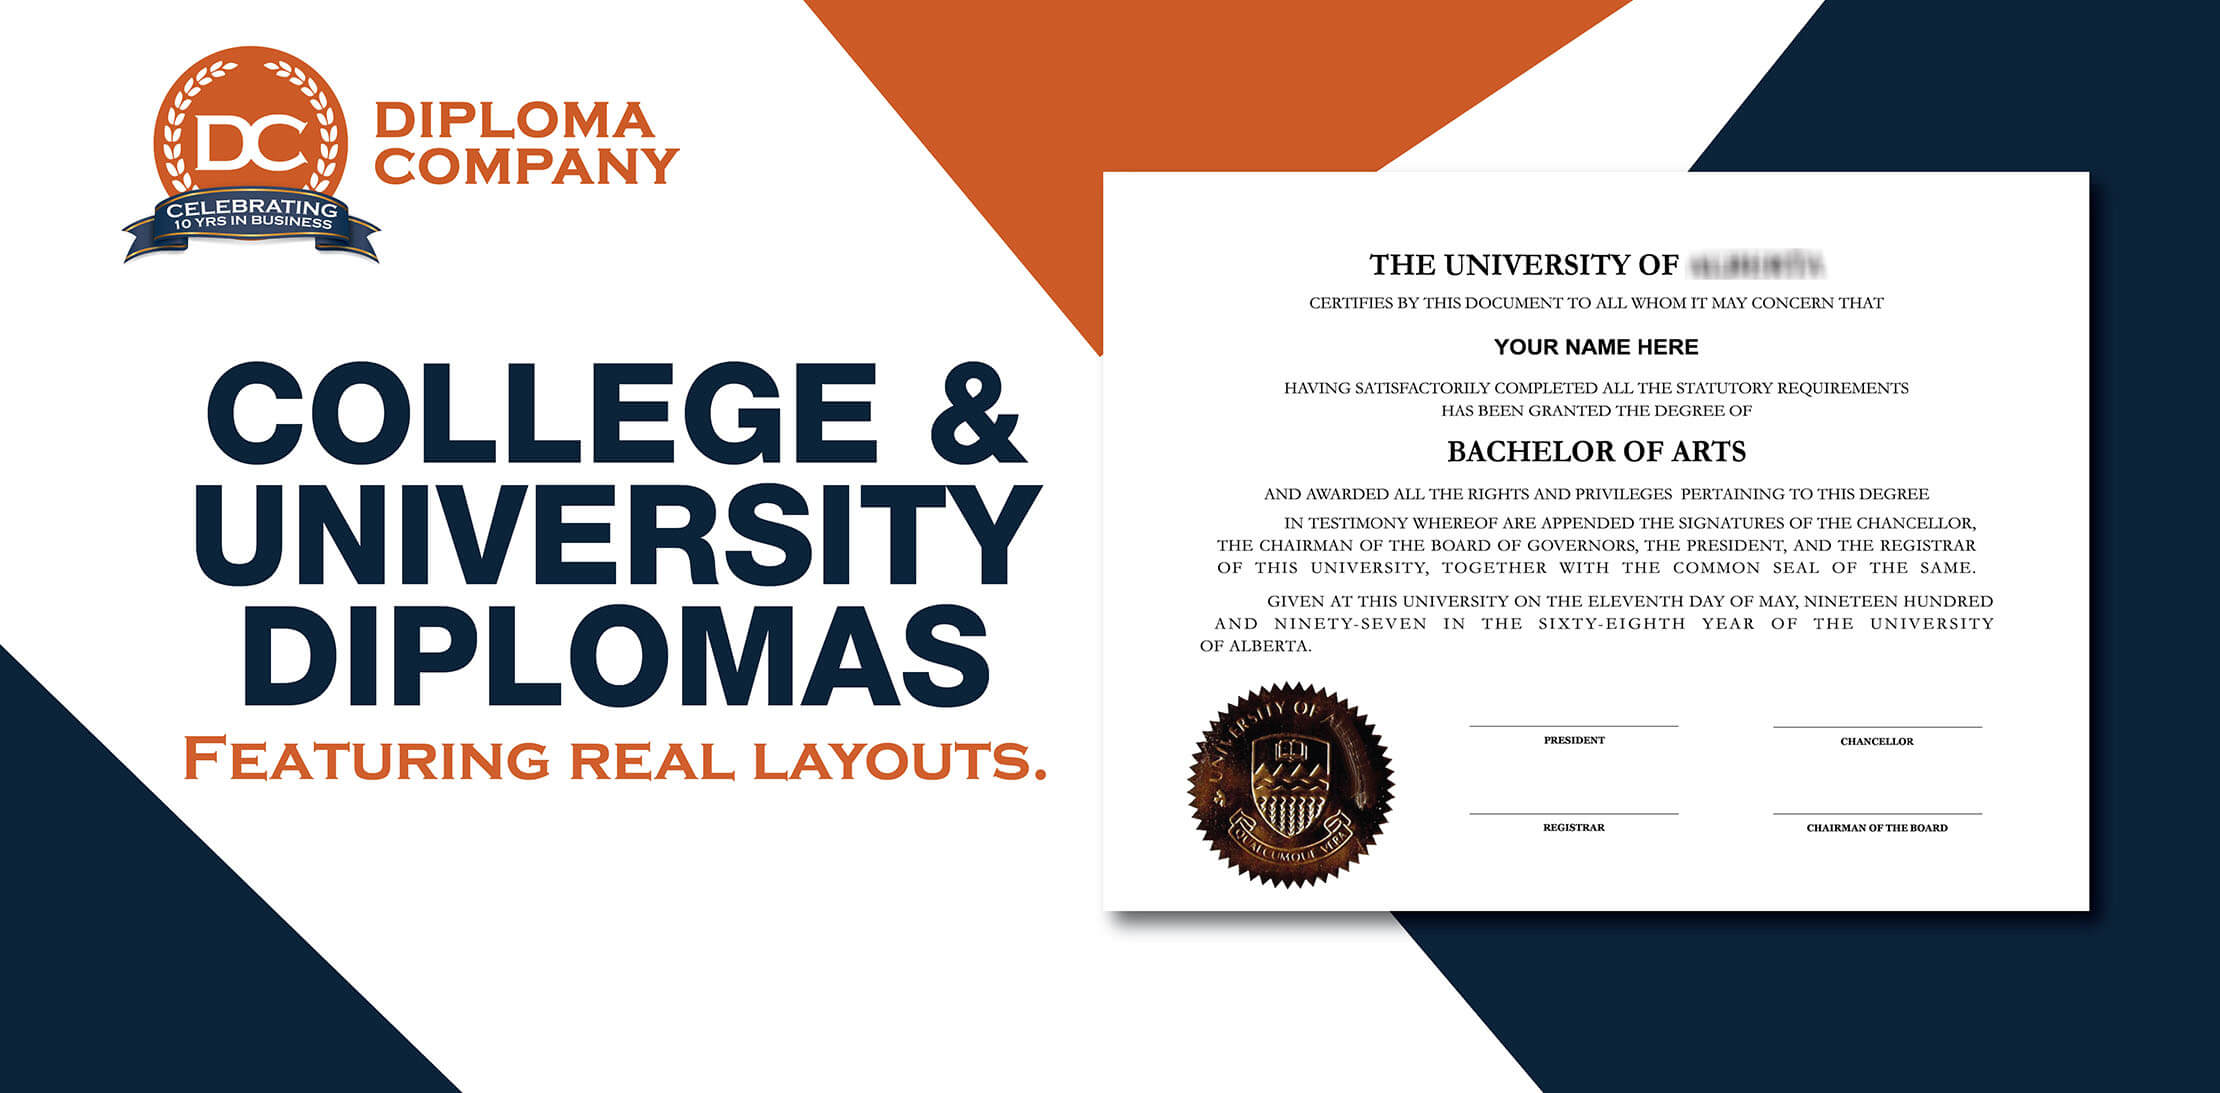 High-Quality Replica College Diplomas and University Degree